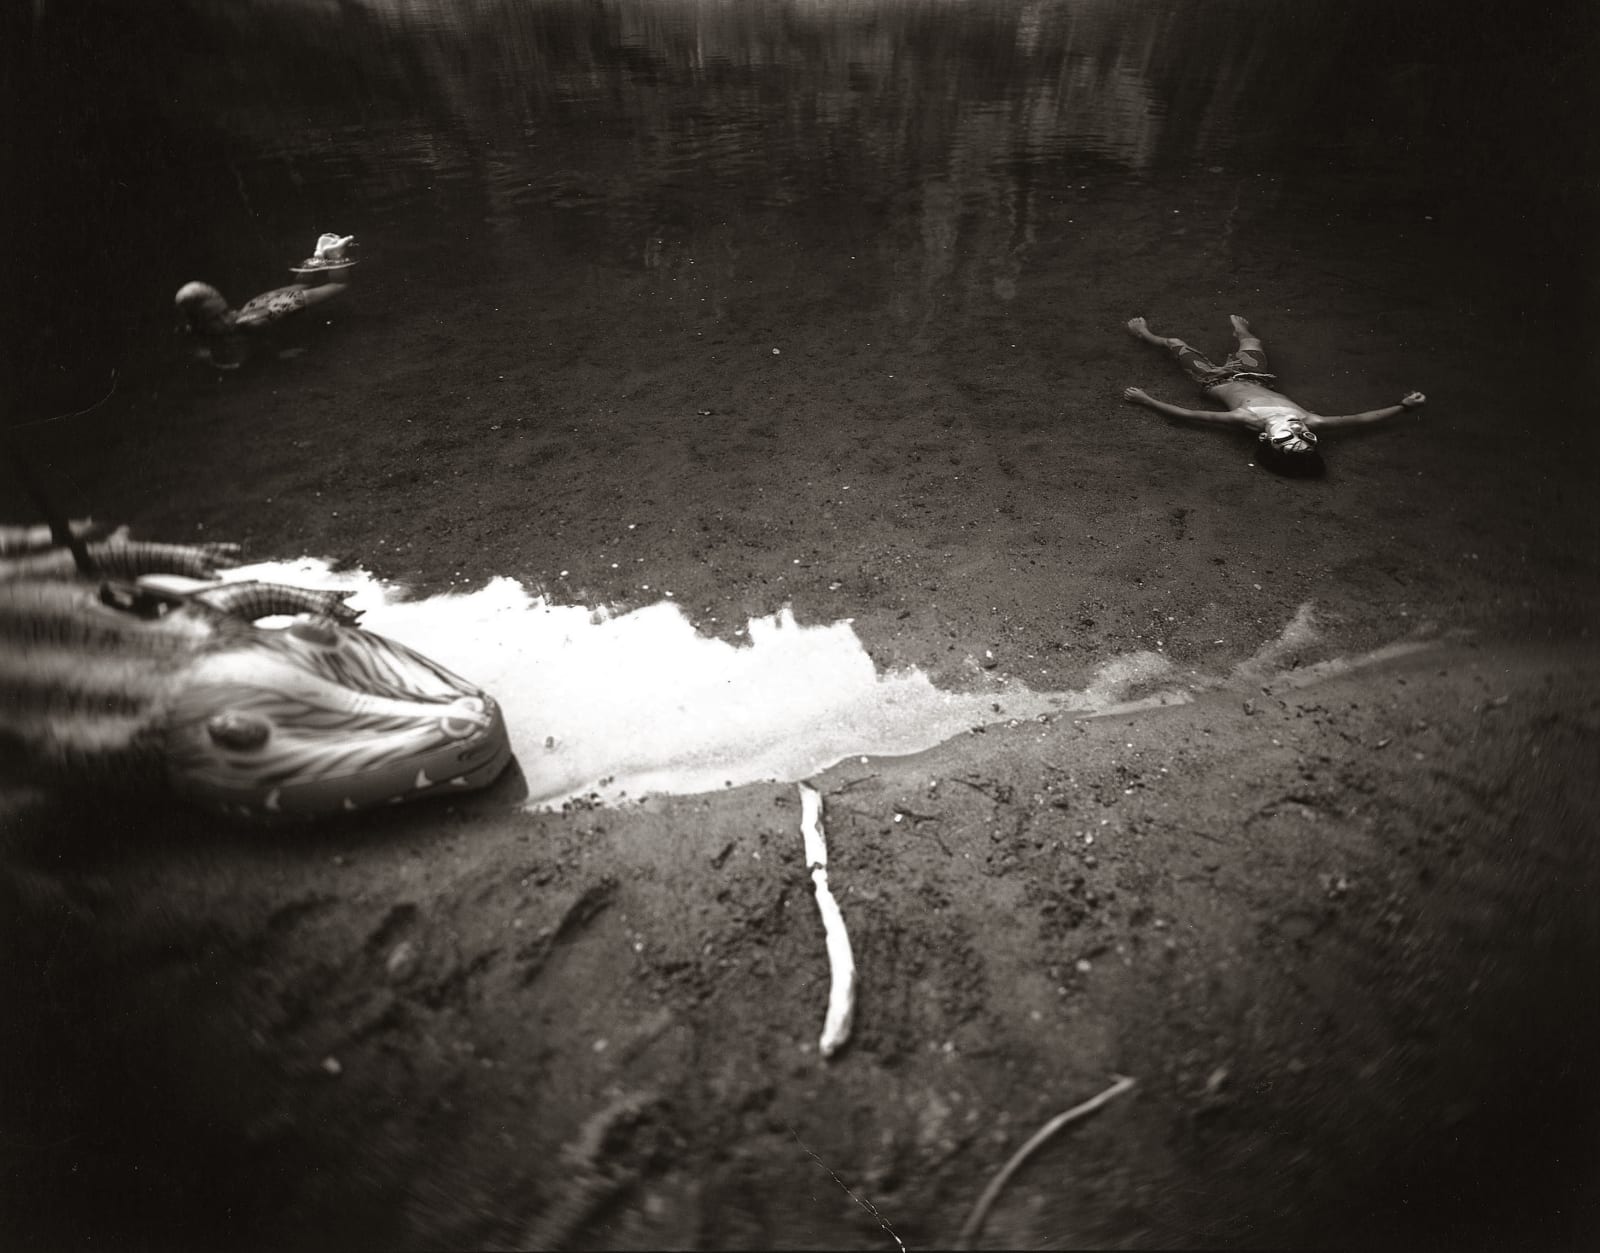 Emmett floating in river with alligator raft, from the Immediate Family series by Sally Mann